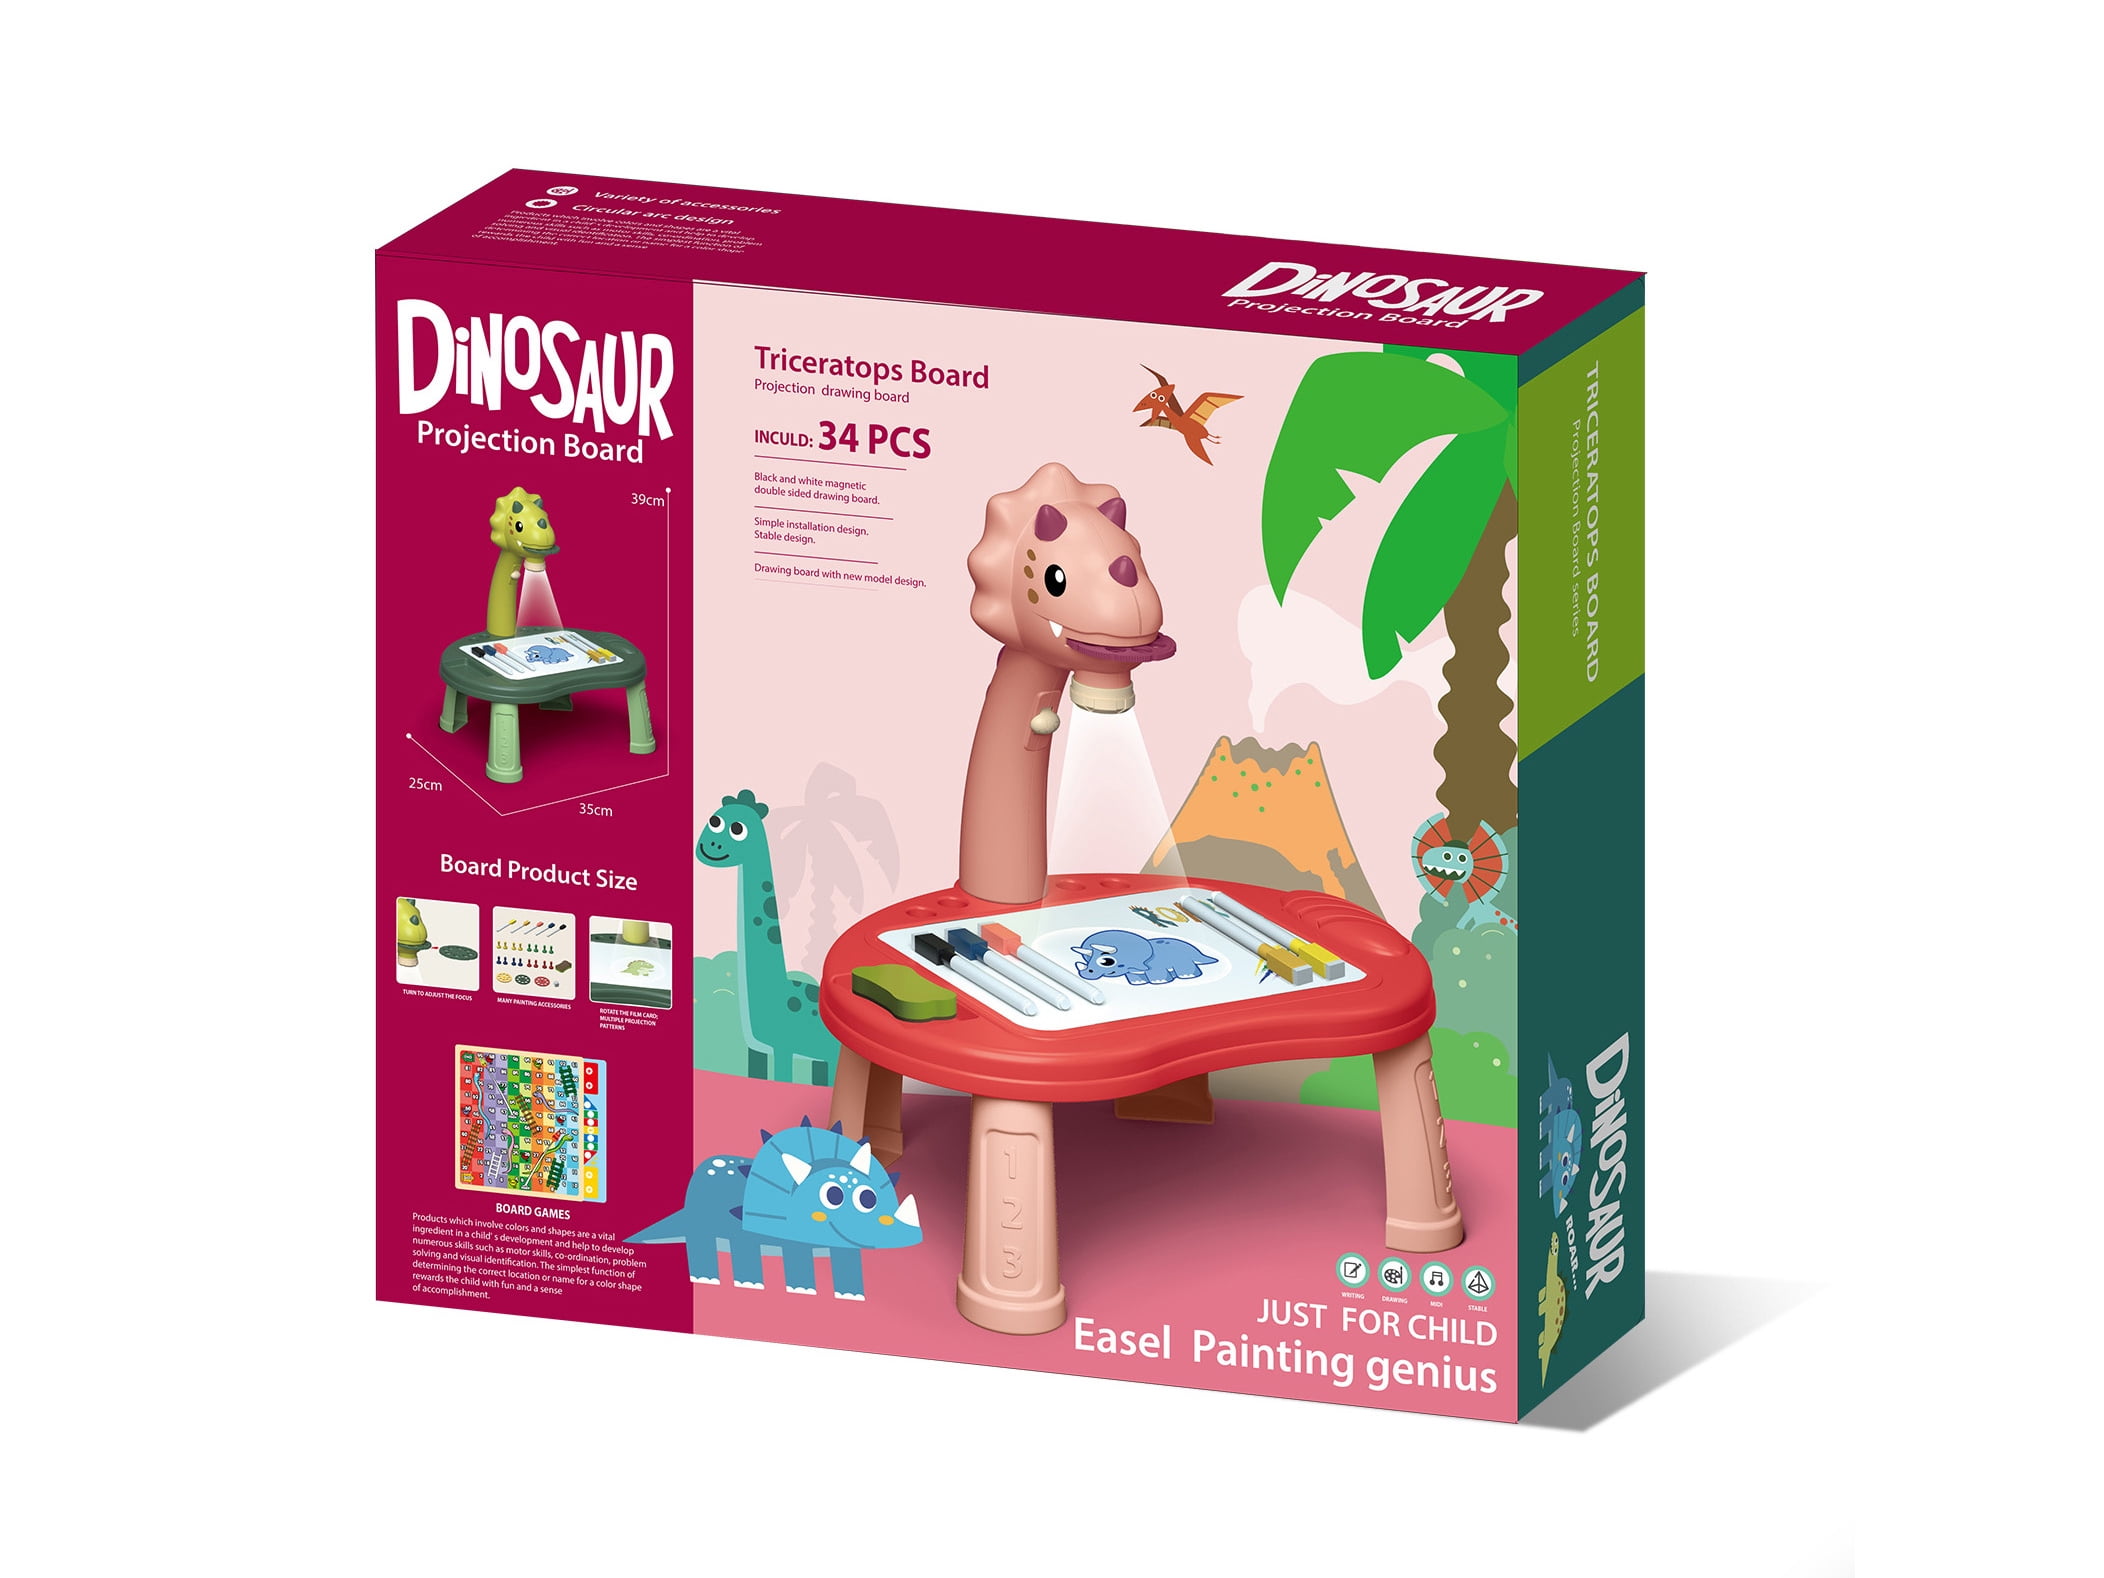 Petmoko 3D Drawing Board for Kids, Kids Toys, Art Tools, Vacation Hifts for Girls, LED Drawing Board for Graffiti-Dinosaur Drawing Paper, Dinosaurs